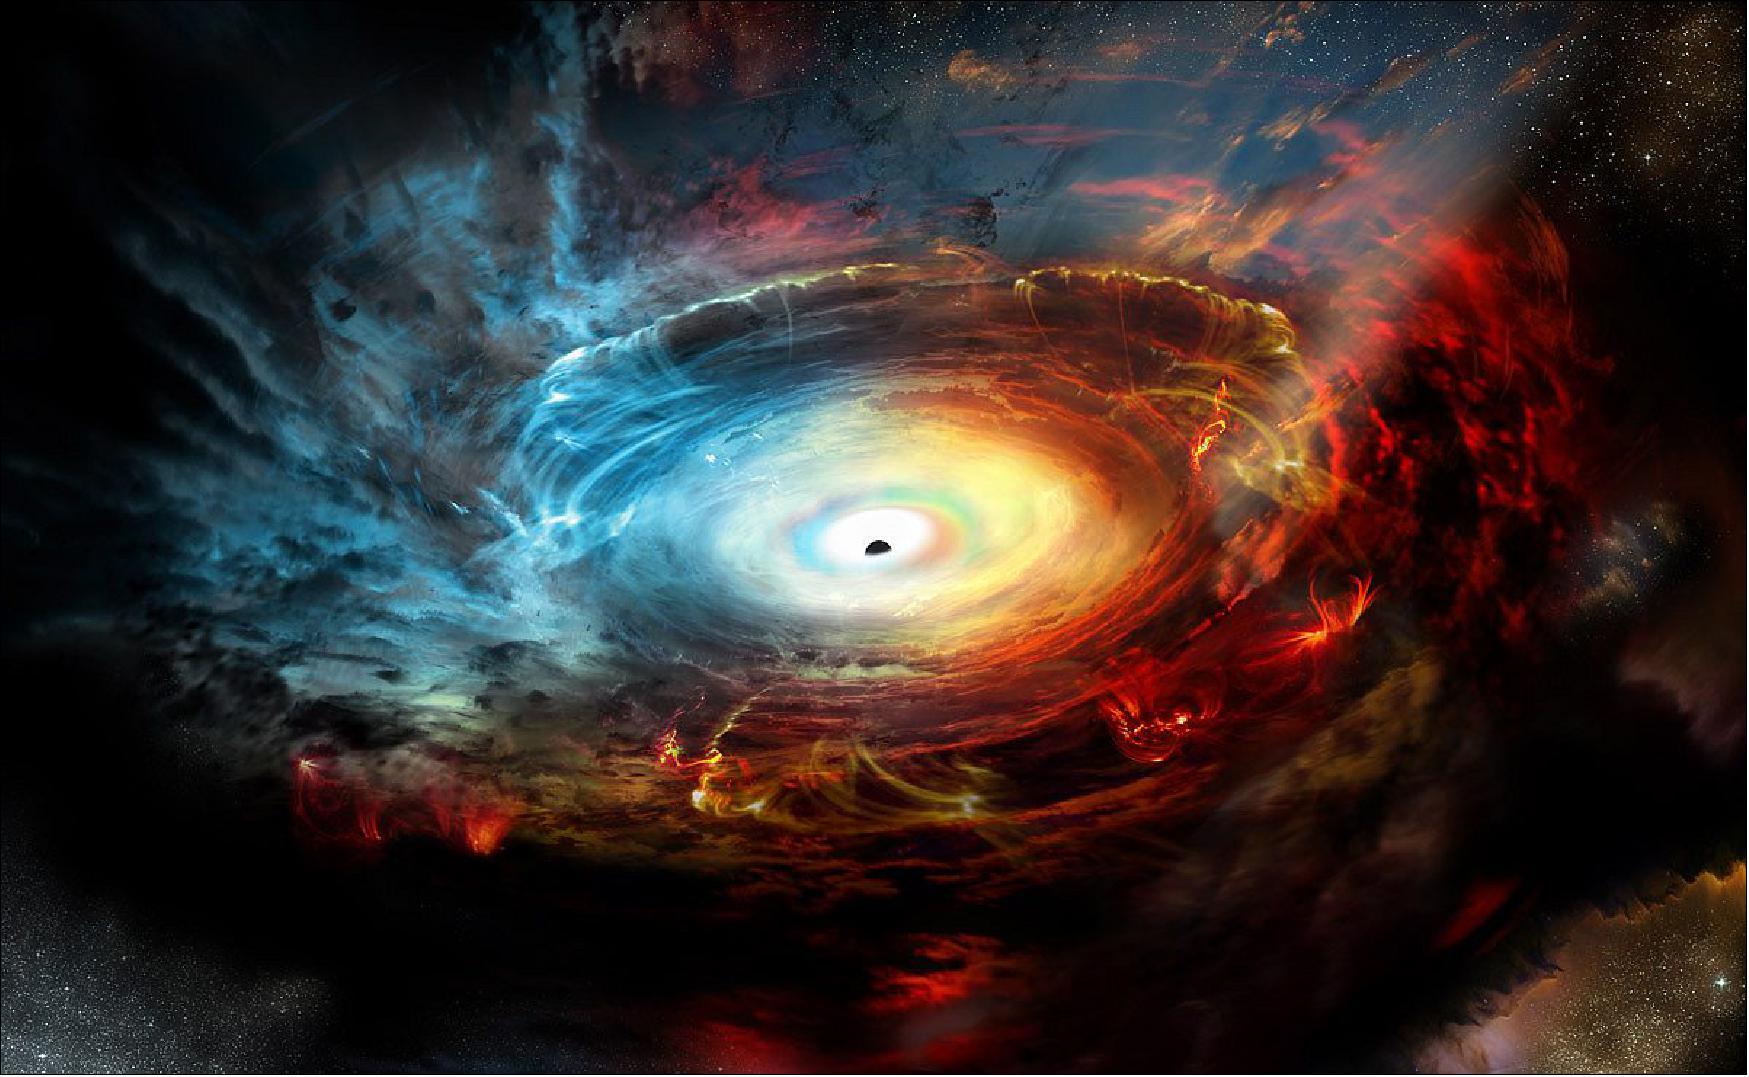 Figure 36: Artist impression of the heart of galaxy NGC 1068, which harbors an actively feeding supermassive black hole. Arising from the black hole's outer accretion disk, ALMA discovered clouds of cold molecular gas and dust. This material is being accelerated by magnetic fields in the disk, reaching speeds of about 400 to 800 kilometers per second. This material gets expelled from the disk and goes on to hide the region around the black hole from optical telescopes on Earth. Essentially, the black hole is cloaking itself behind a veil of its own exhaust (image credit: NRAO/AUI/NSF; D. Berry / Skyworks)